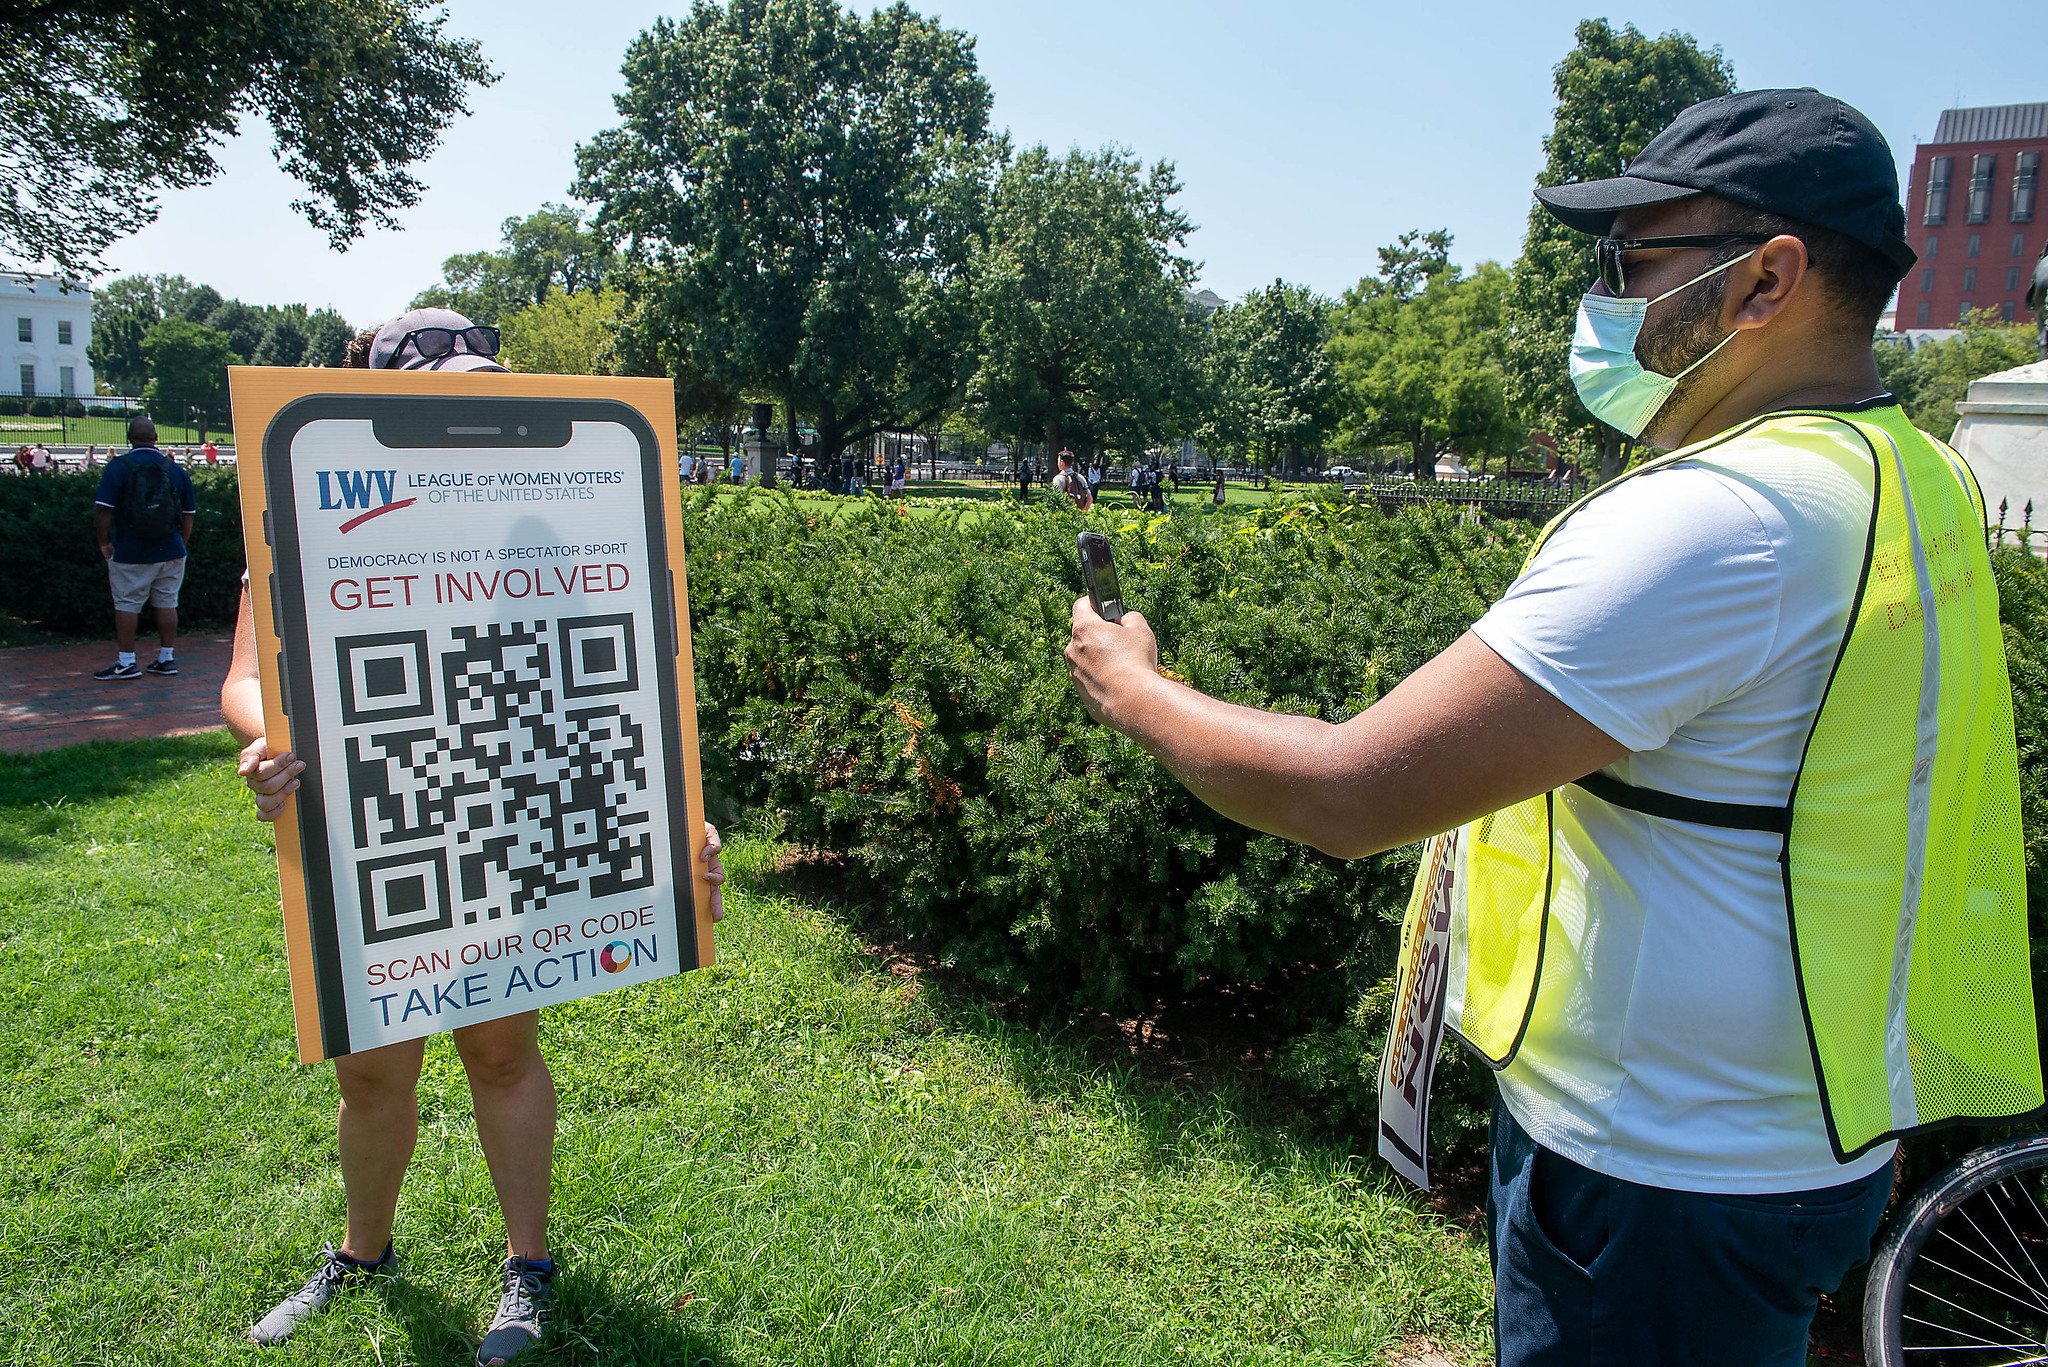 LWVUS staff holding up a poster board at a rally outside with a QR code to download OutreachCircle. On the right, a member of the rally is scanning the QR code on their smartphone.